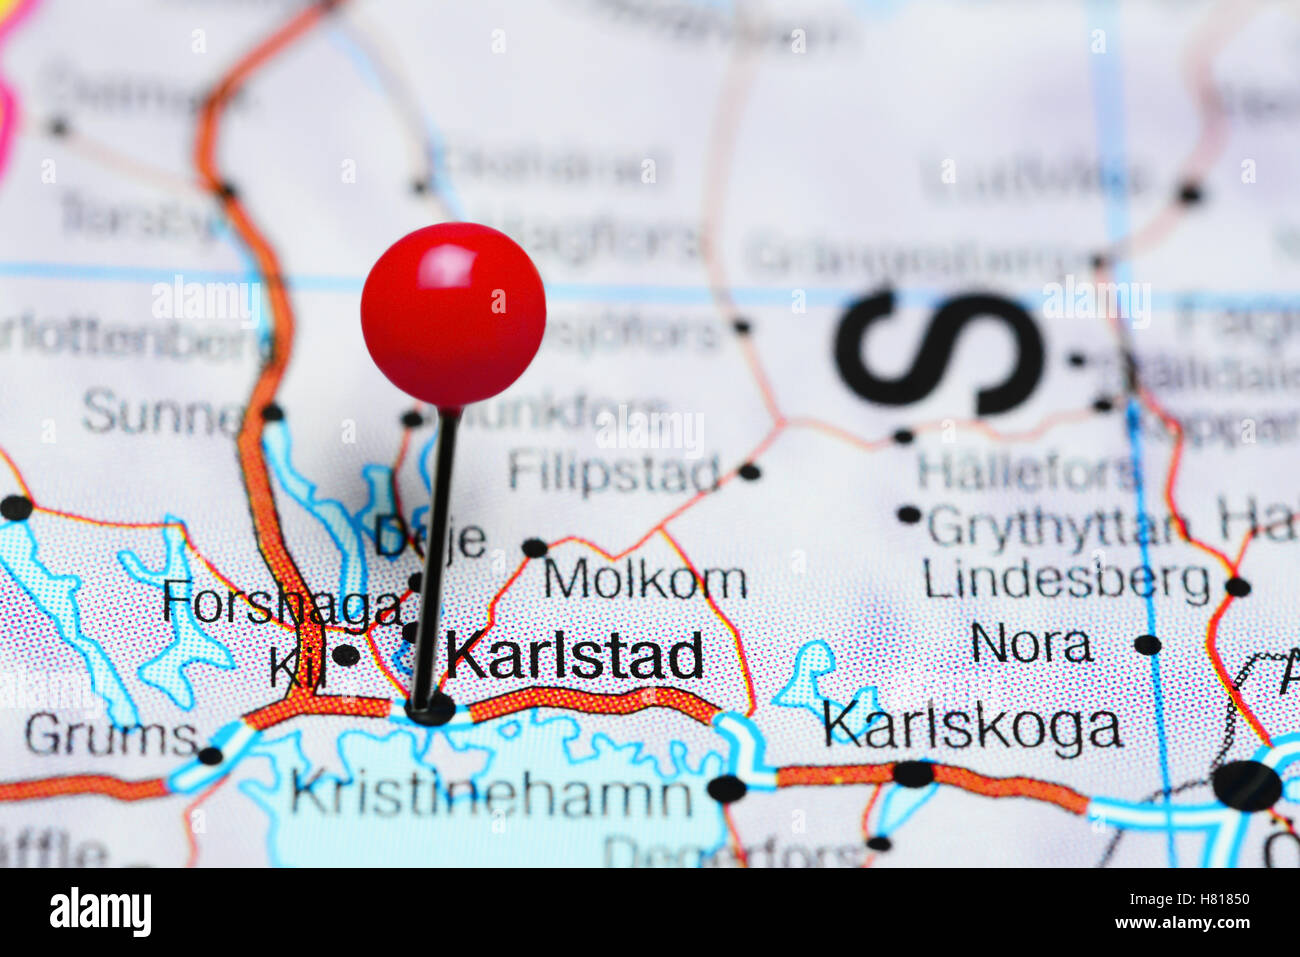 Karlstad pinned on a map of Sweden Stock Photo